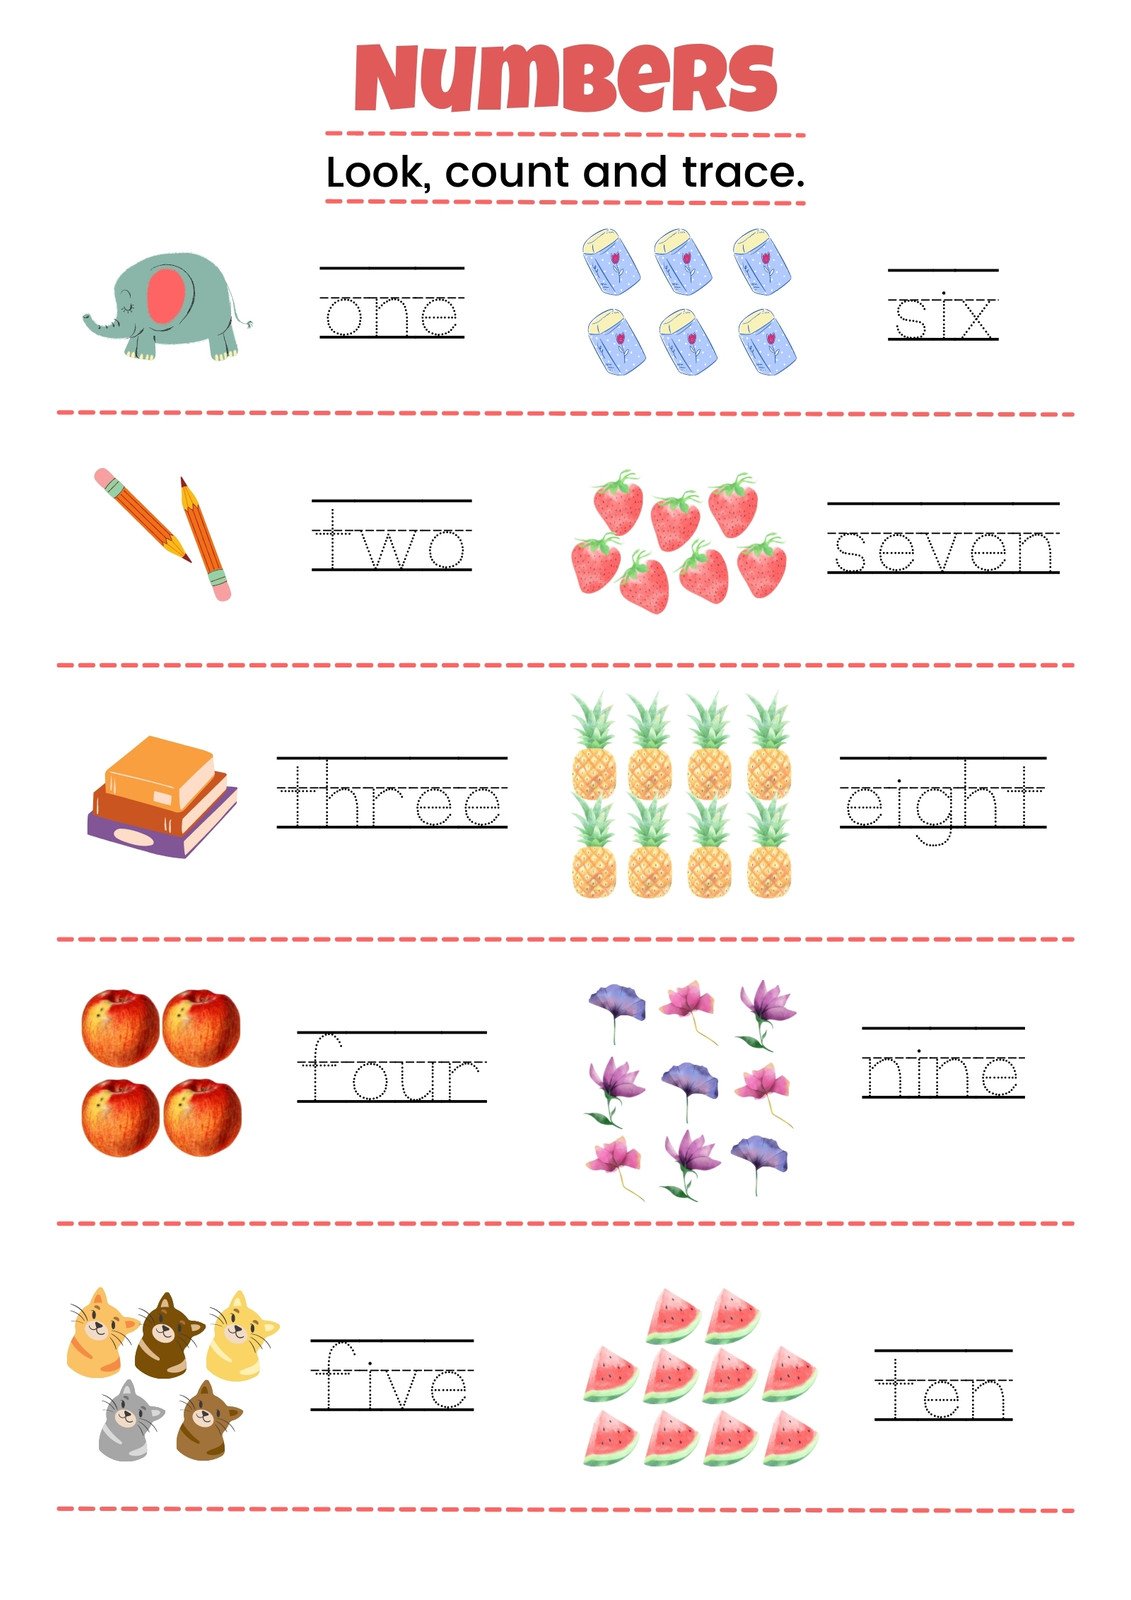 Summer Clothes & Accessories Vocabulary Worksheet - Templates by Canva   Speaking activities english, English language teaching, English teaching  resources